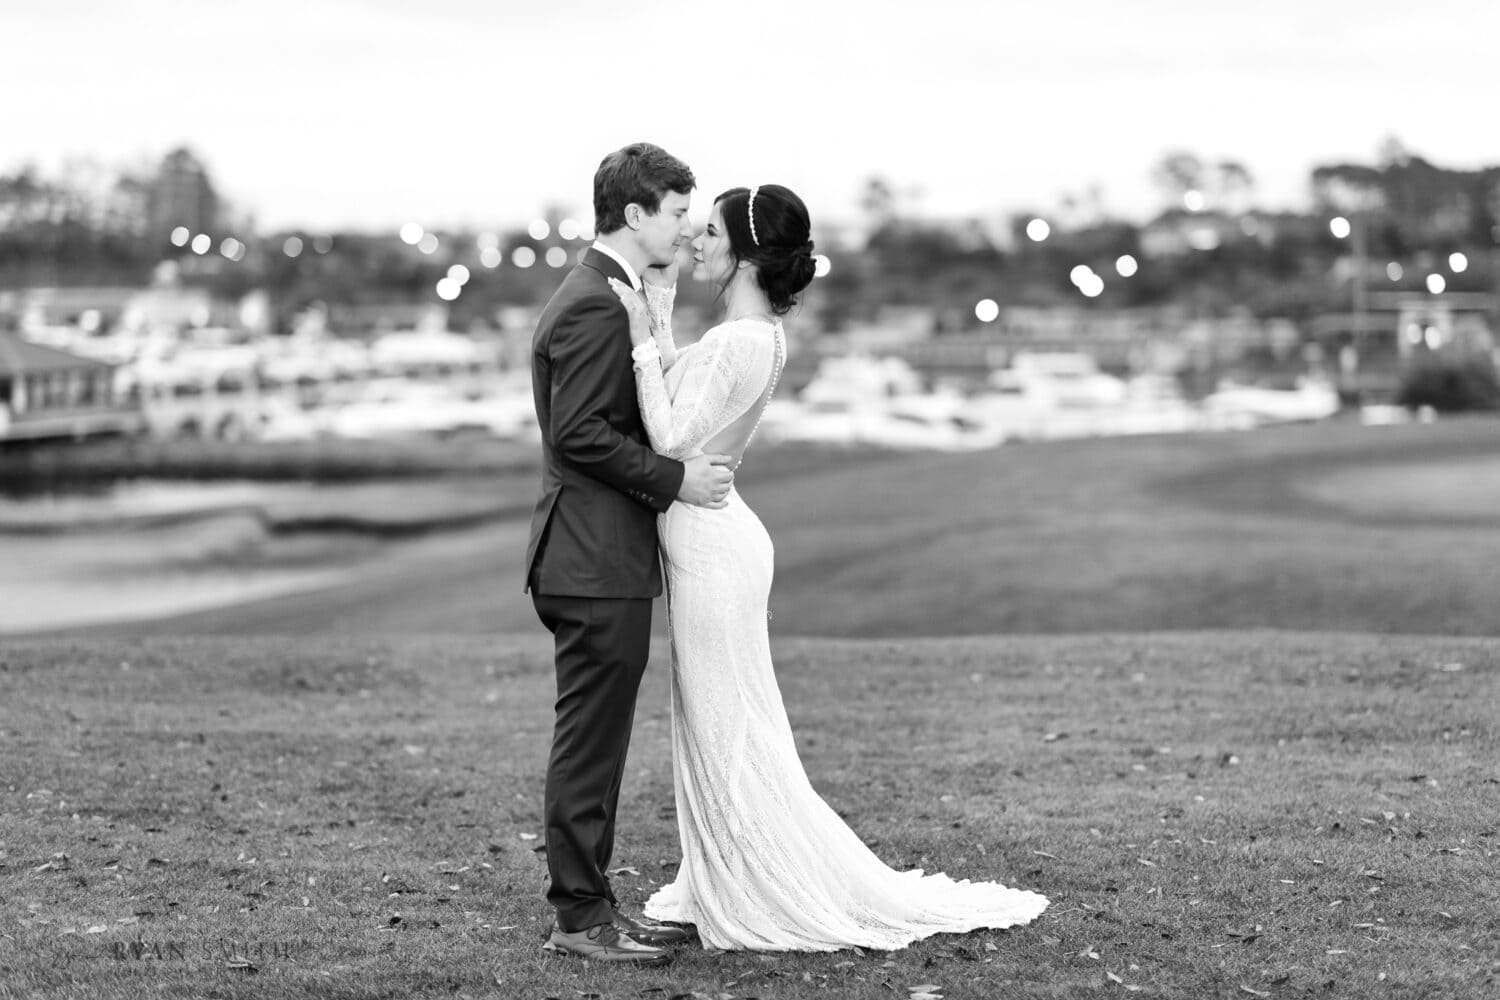 Bride touching groom's face in black and white - Grande Dunes - Myrtle Beach